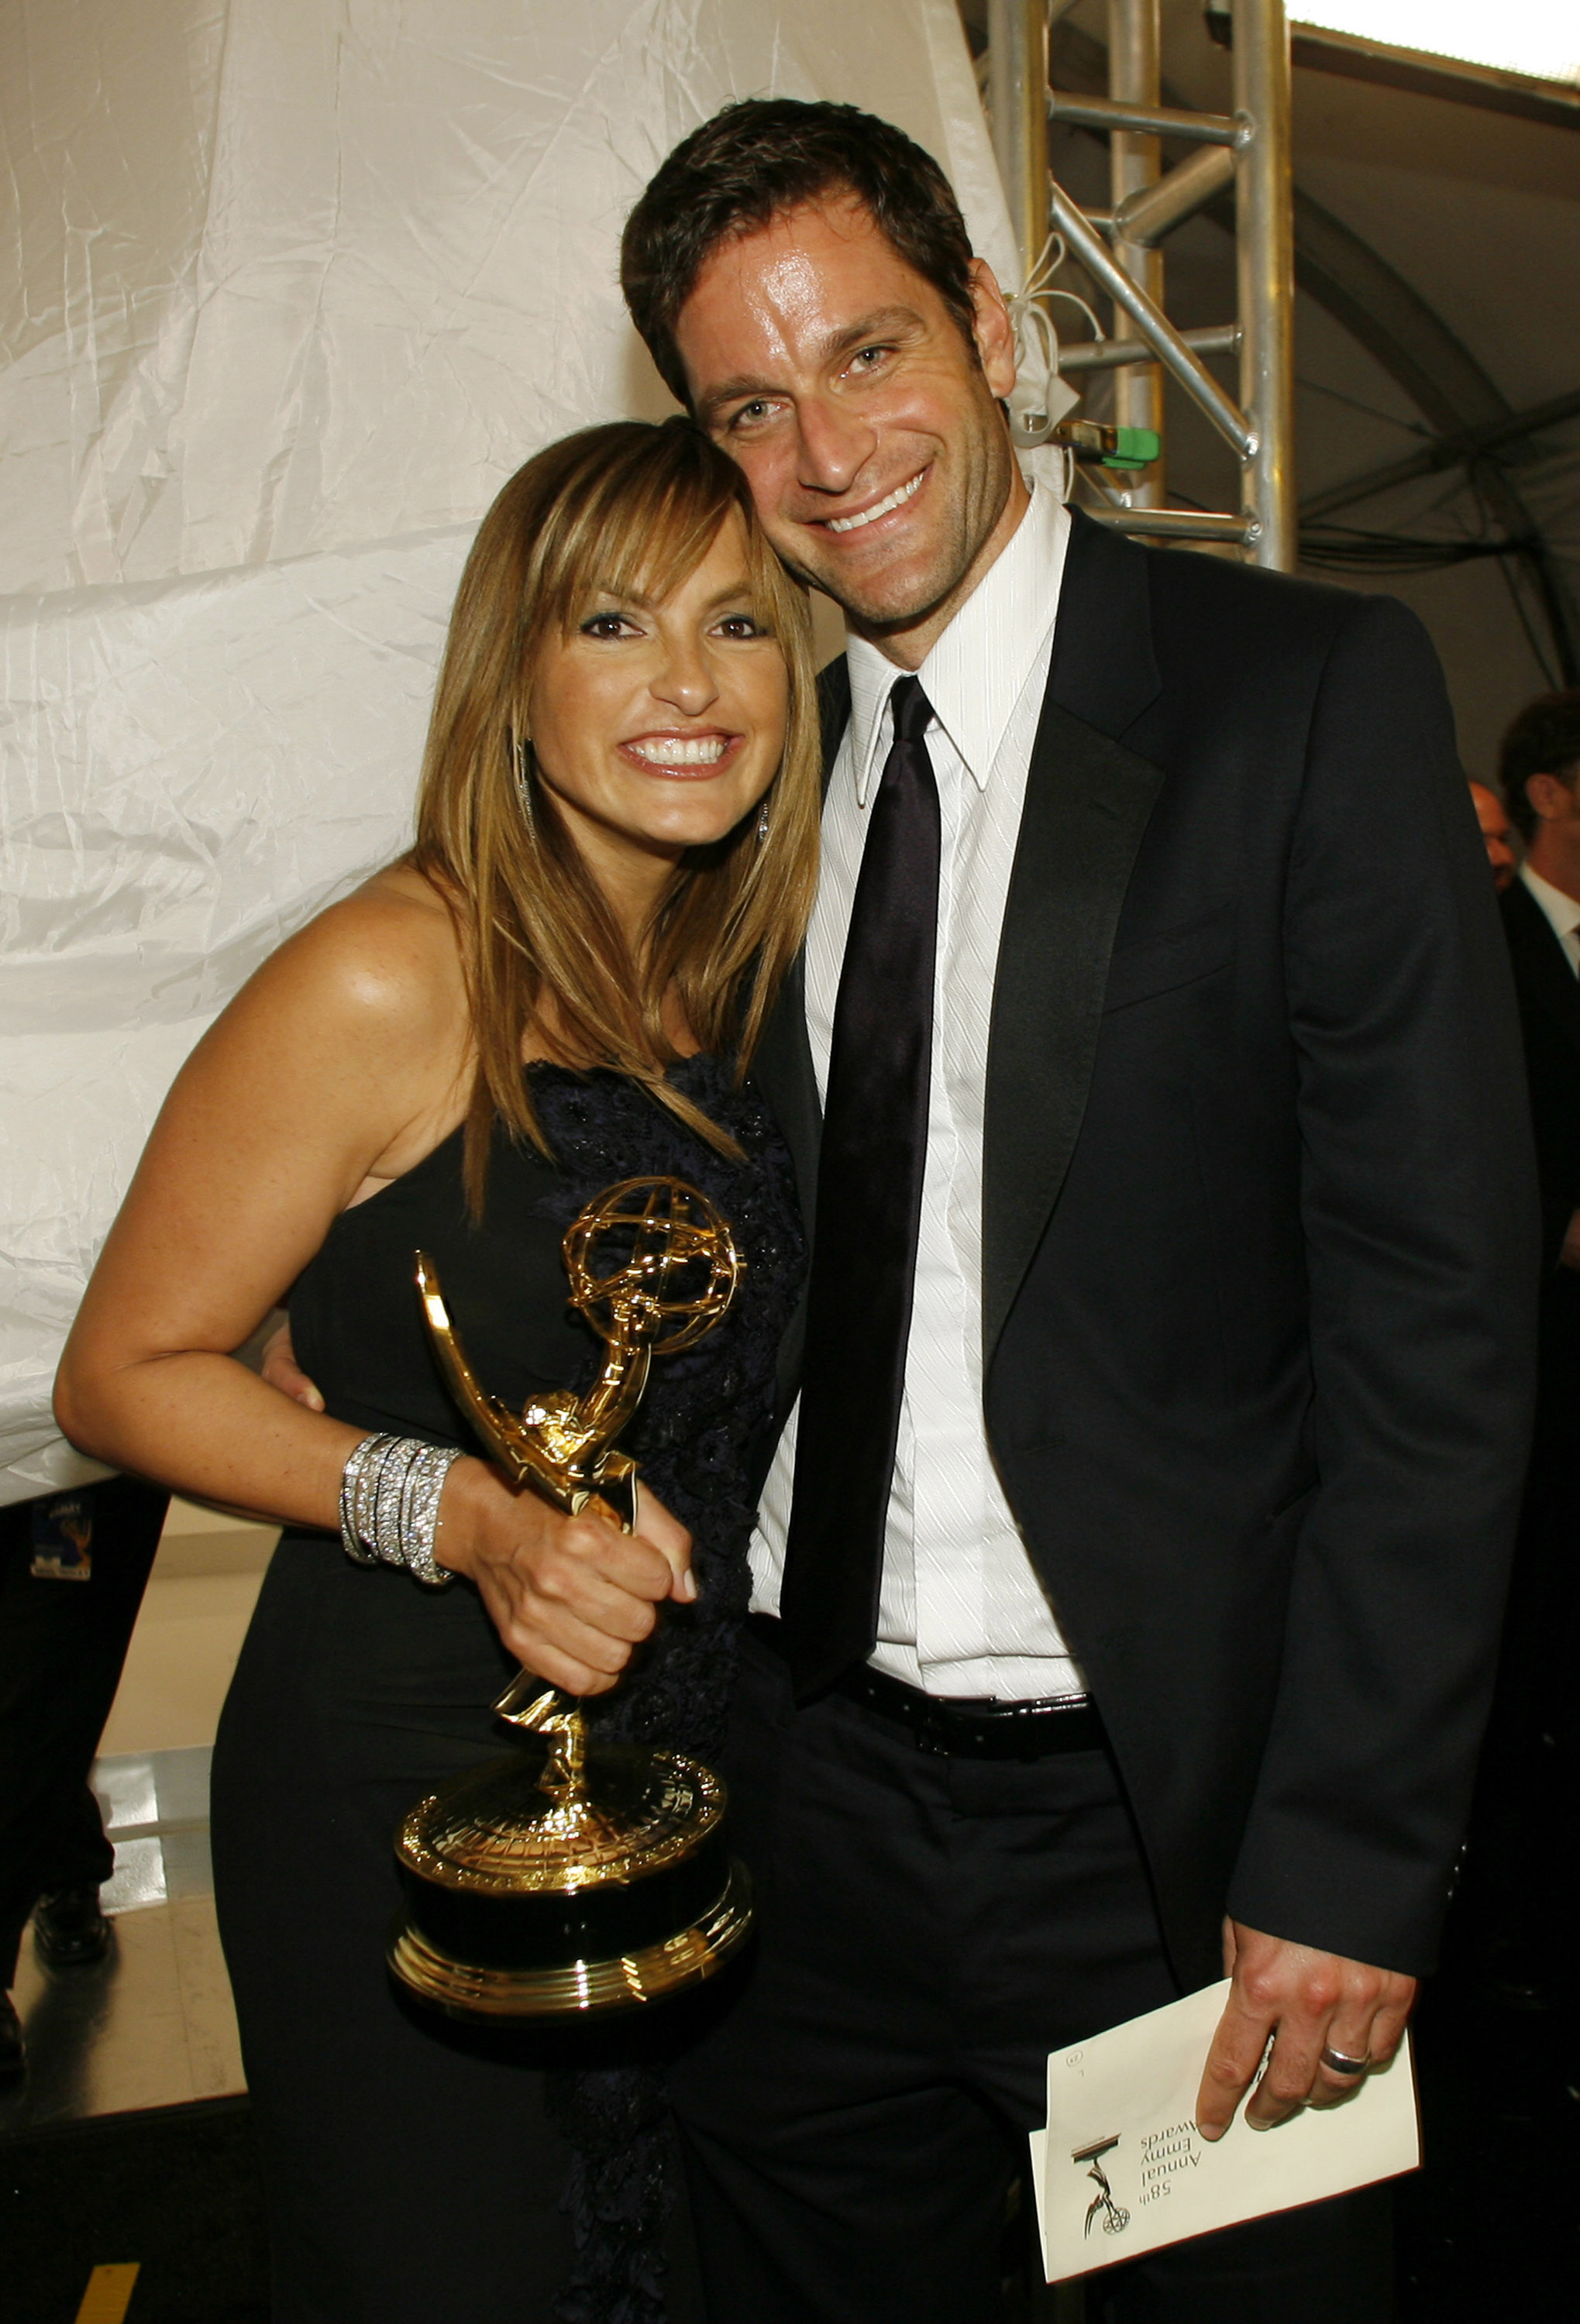 Mariska Hargitay and Peter Hermann at the 58th Annual Primetime Emmy Awards on August 27, 2006 | Source: Getty Images